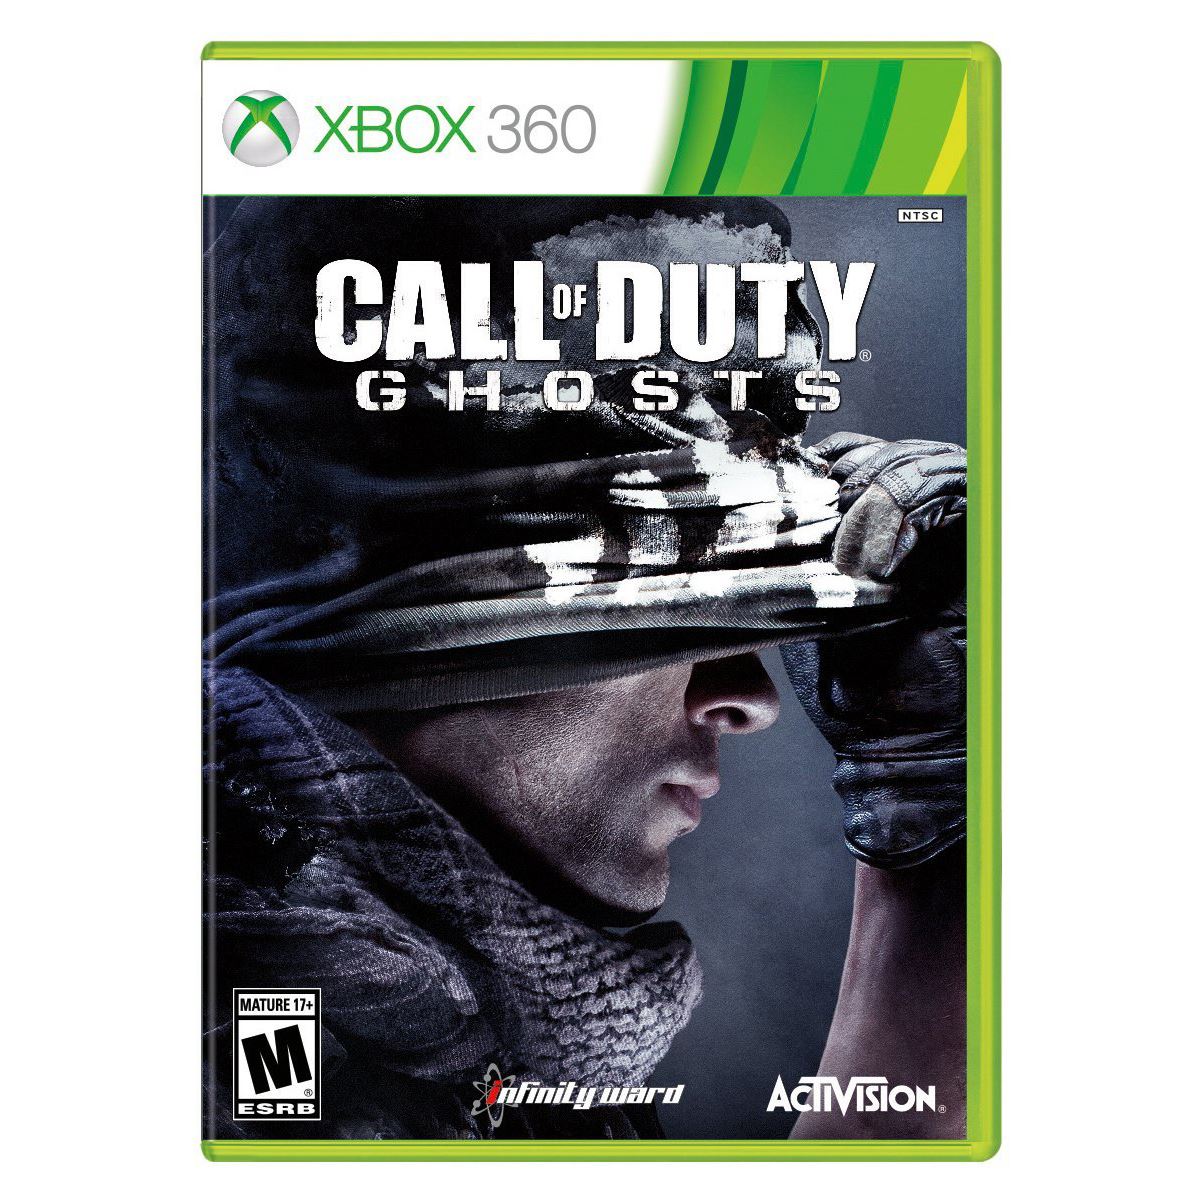 Xbox 360 Call Of Duty Ghosts